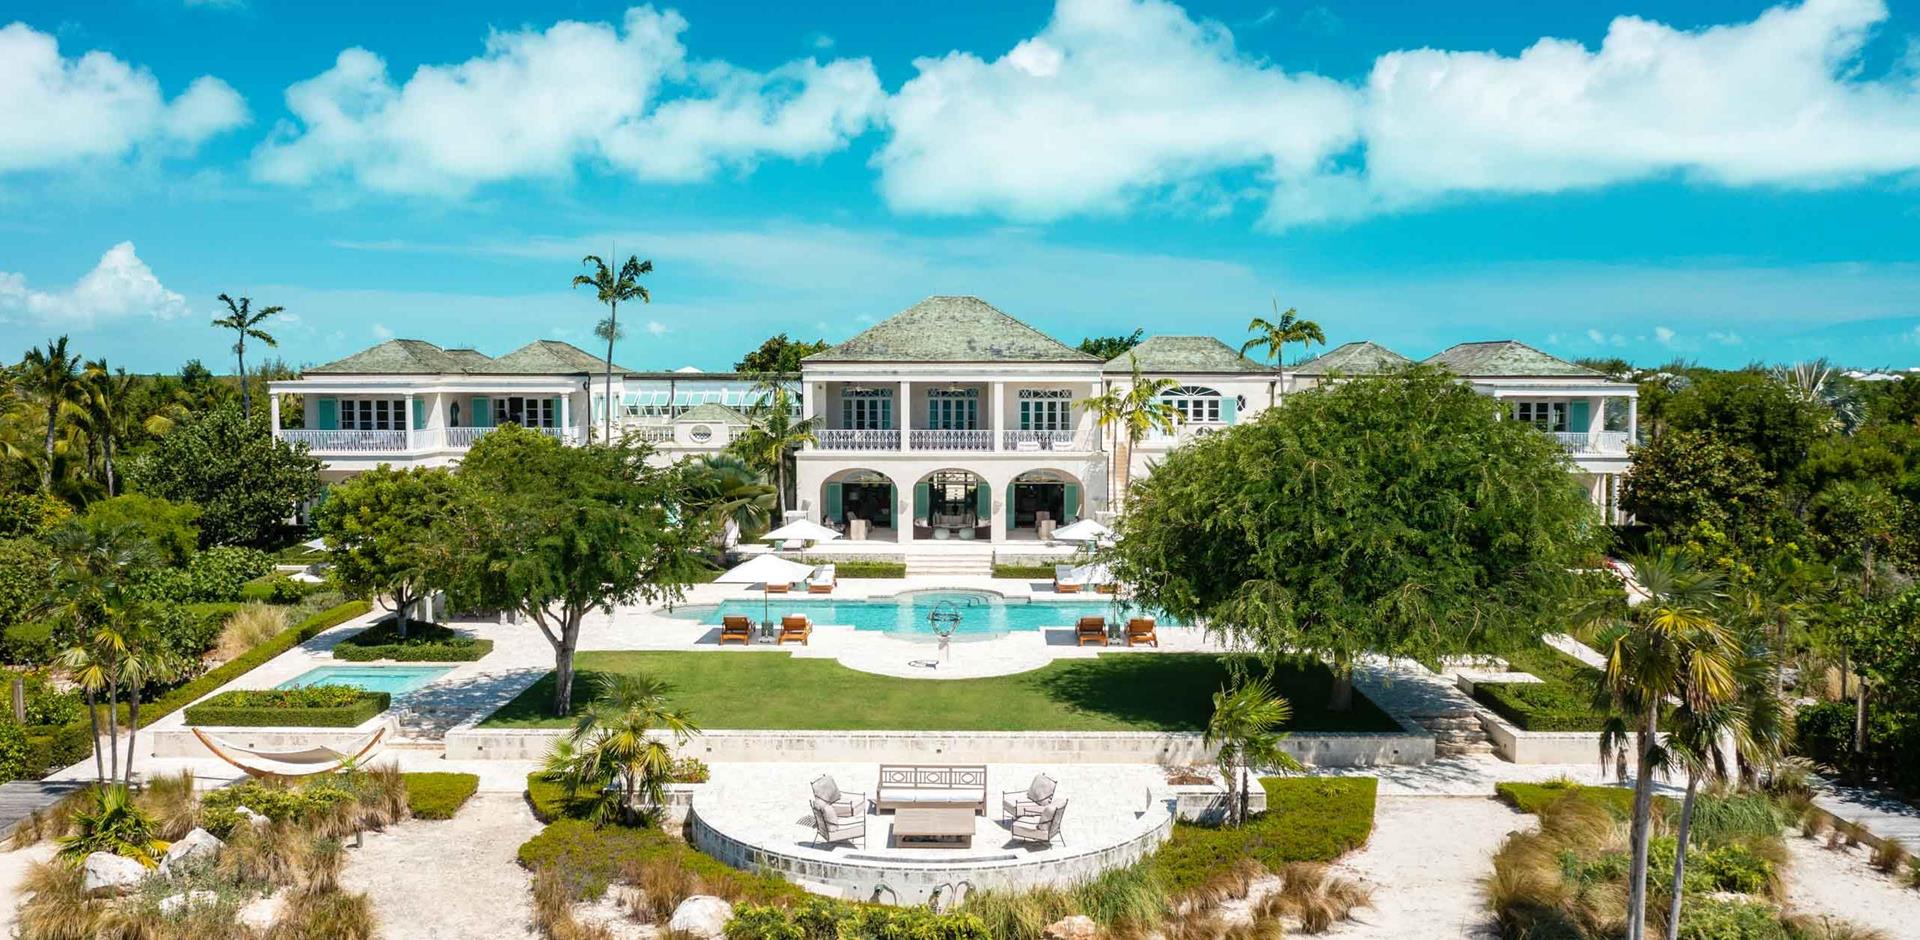 Exterior, The Great House, Turks and Caicos, Caribbean